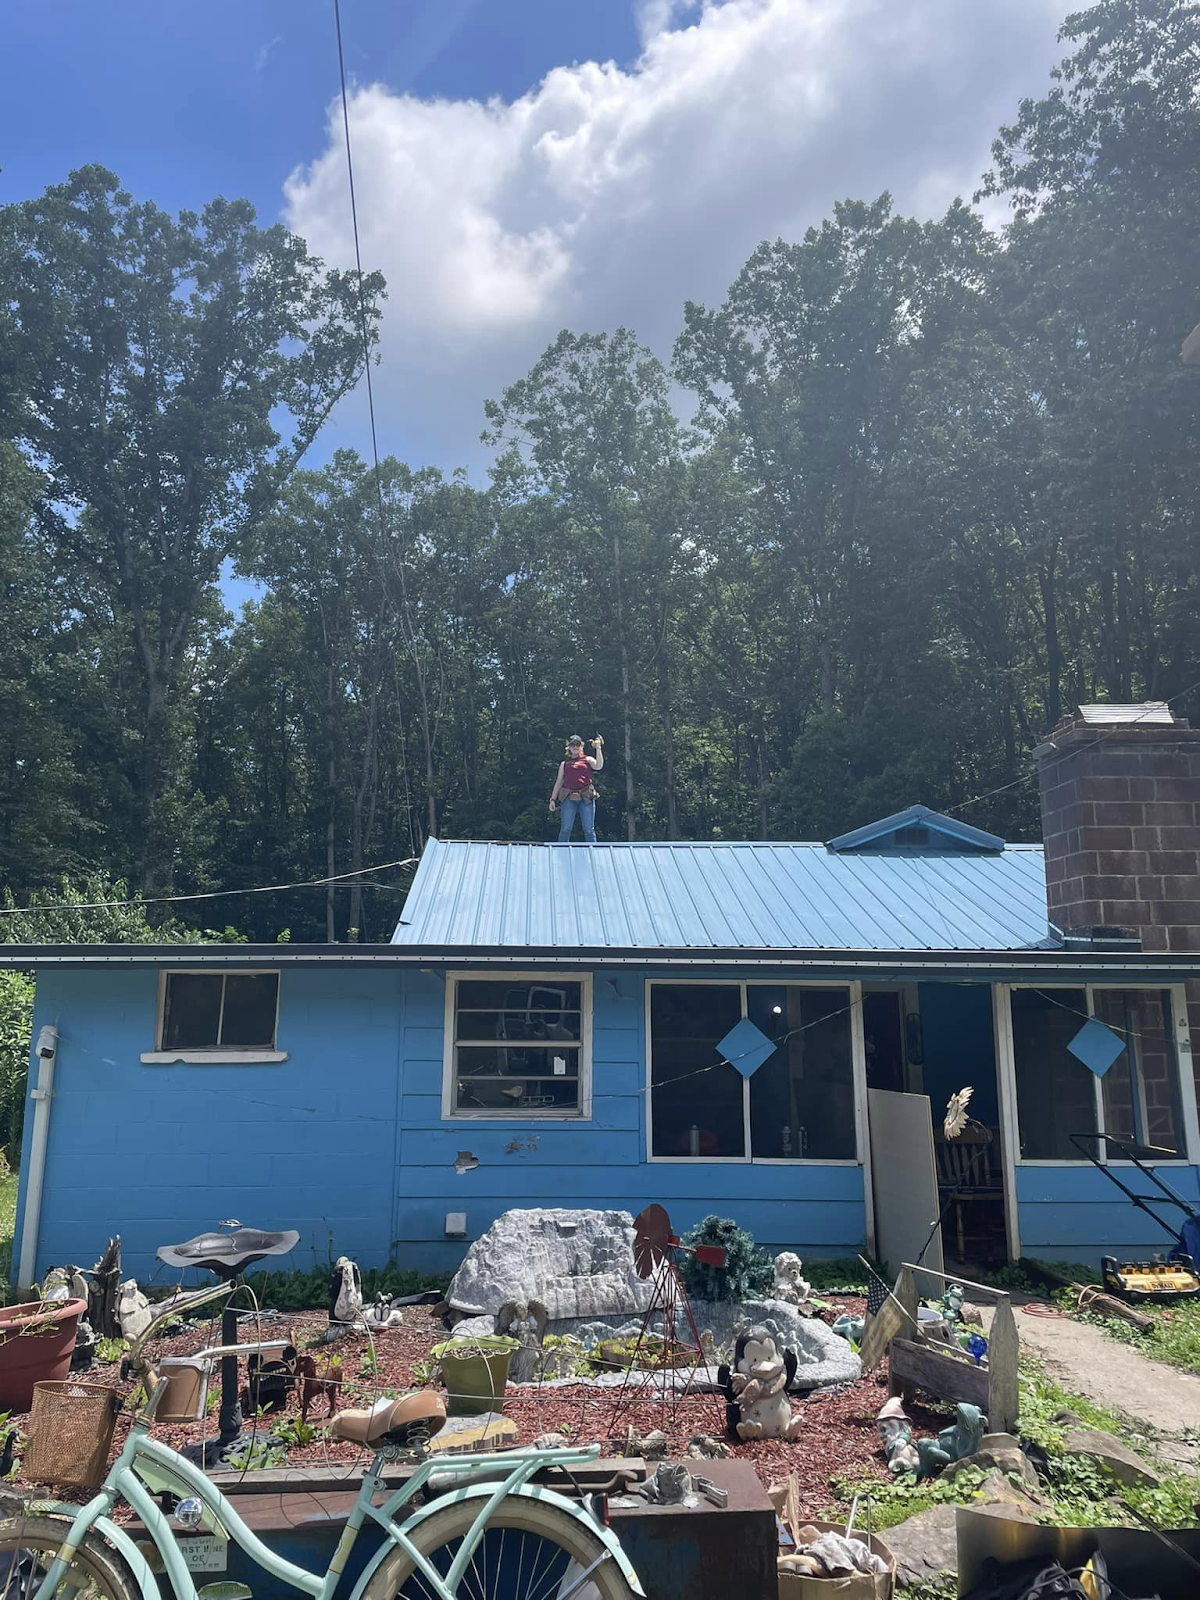 Morgan Pettlon standing on the roof of a blue house